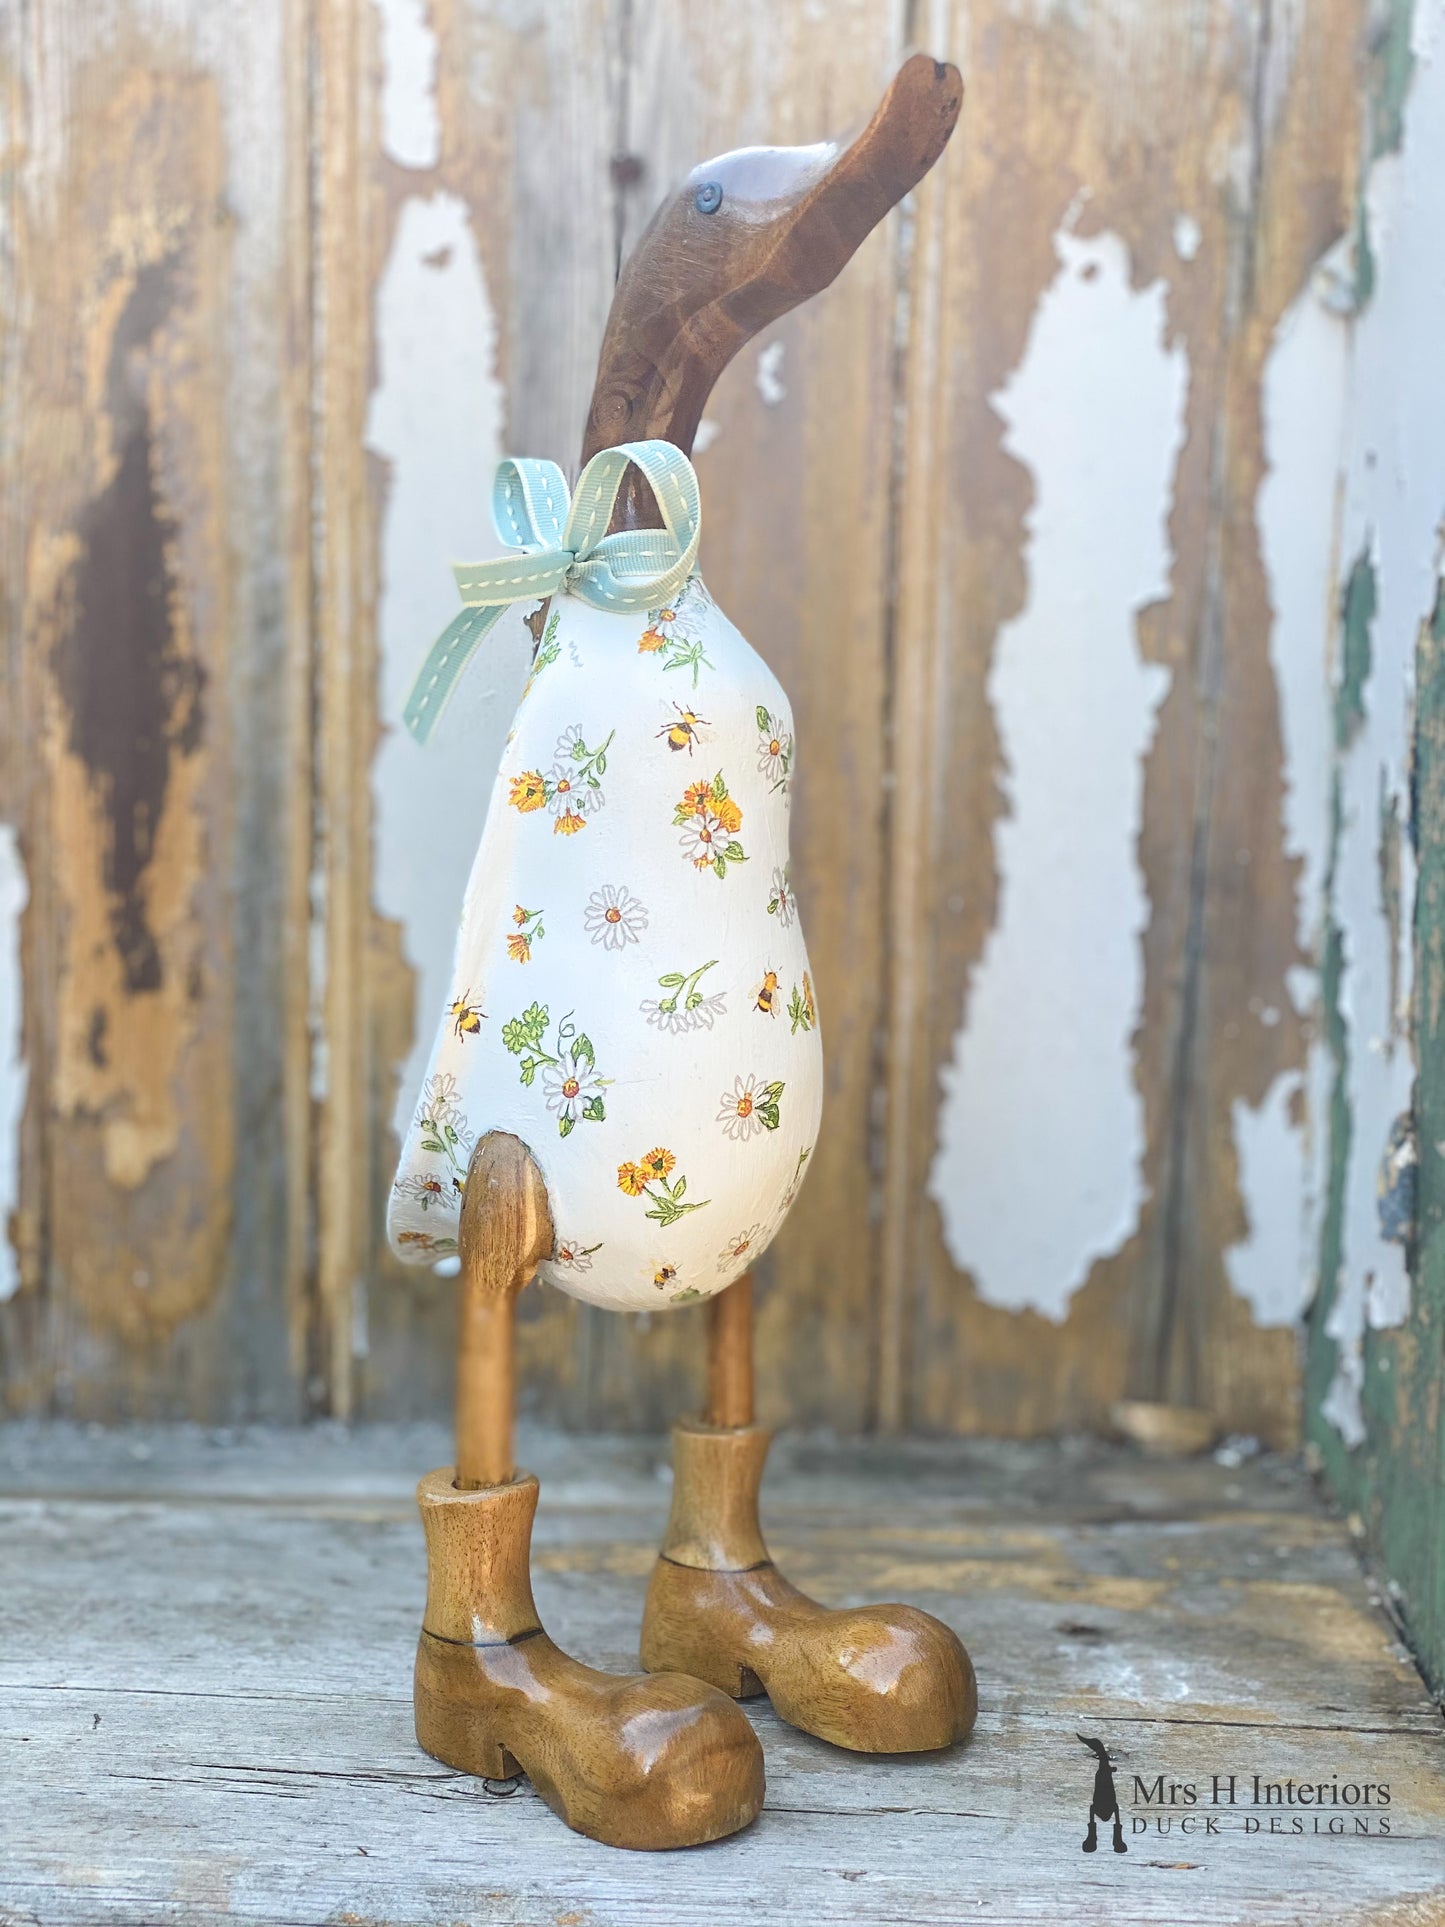 Daisy & Bee - Decorated Wooden Duck in Boots by Mrs H the Duck Lady